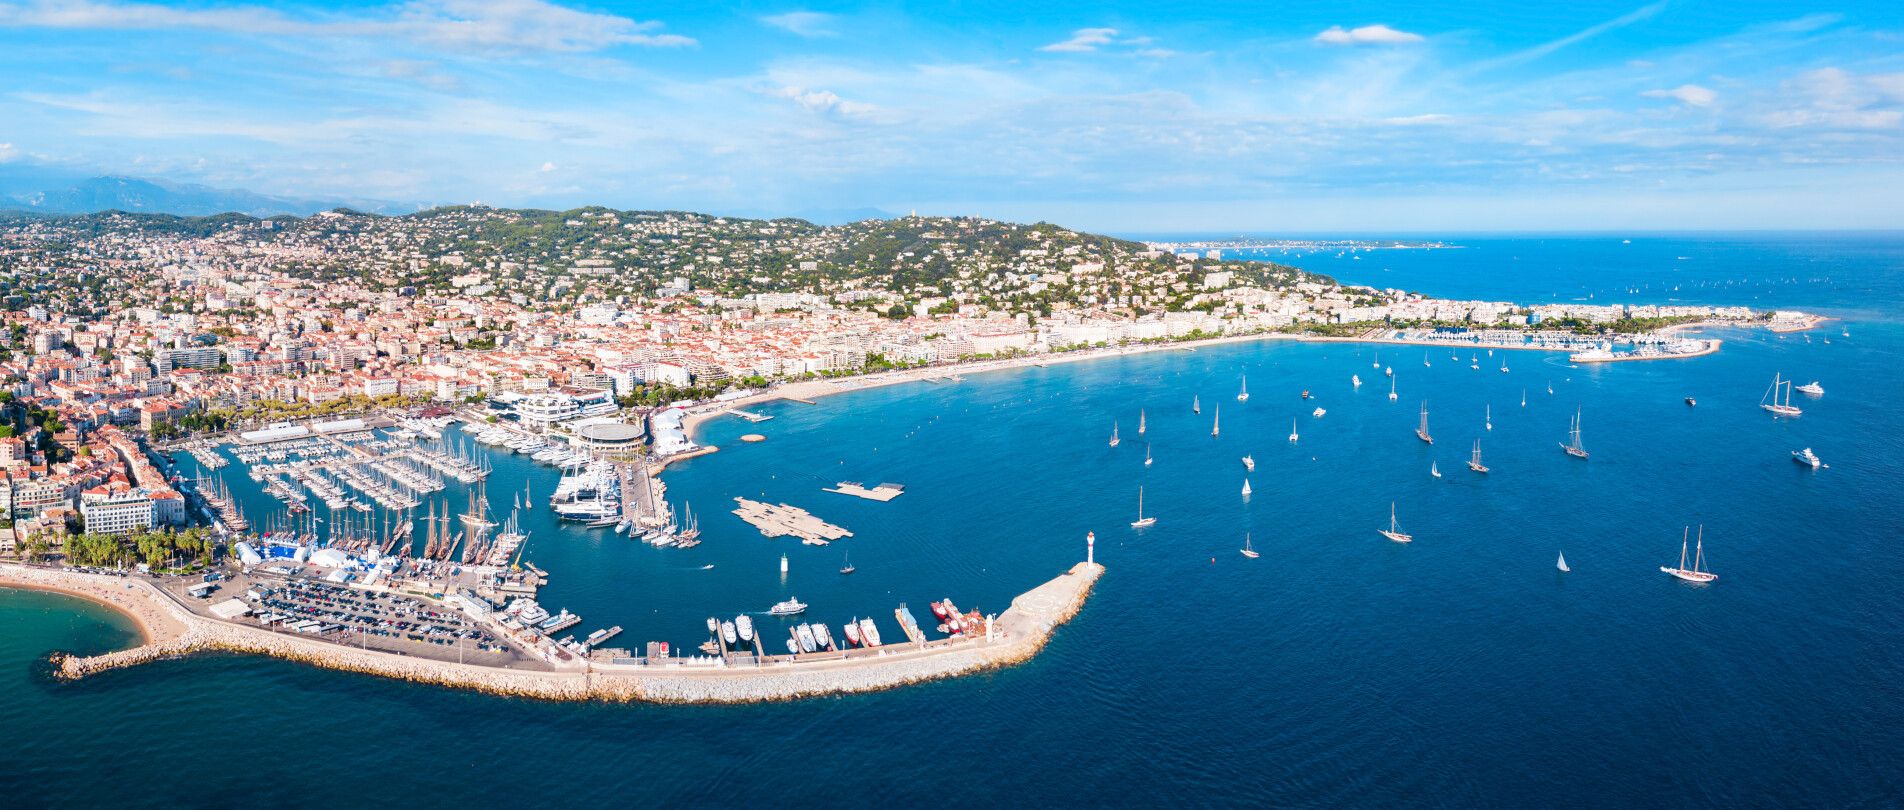 Edmiston yachts at the Cannes Yachting Festival 2022